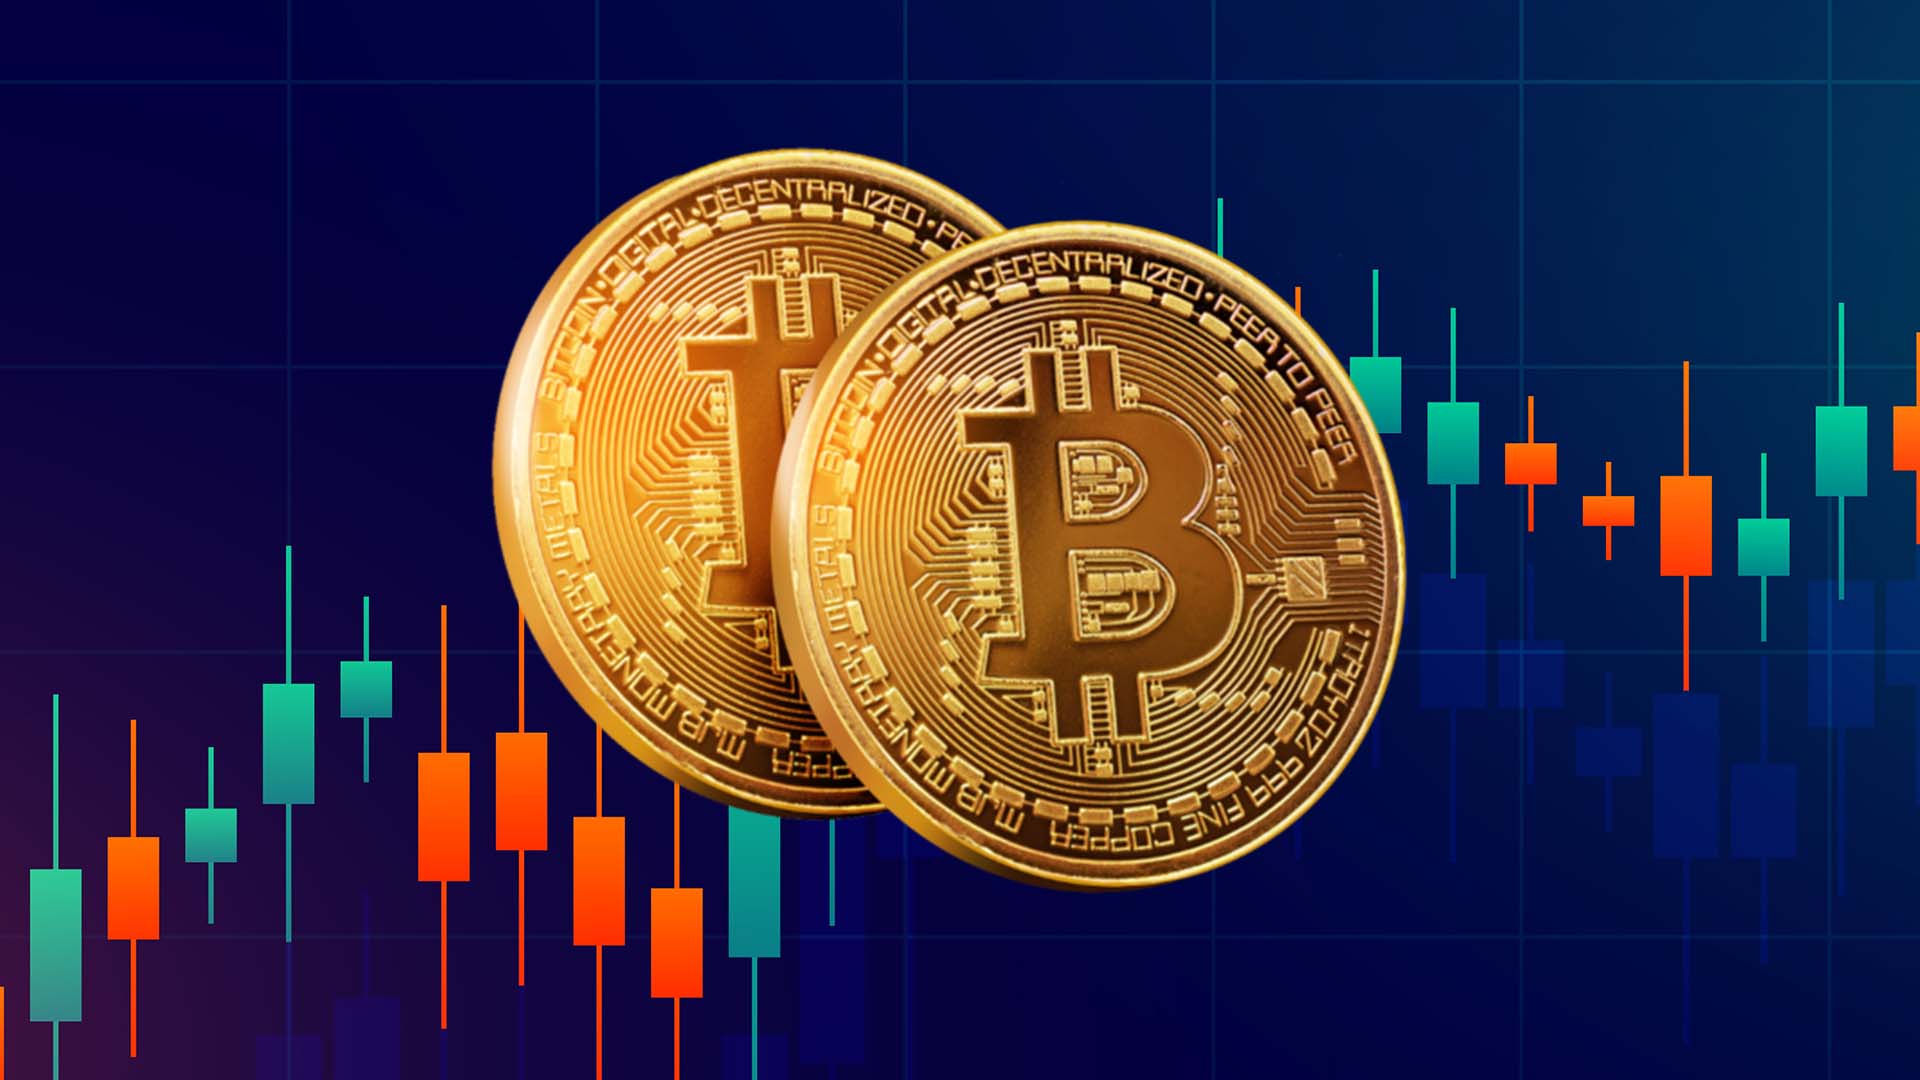 The Price Of Bitcoin Will Be Affected By FTX Fluctuations